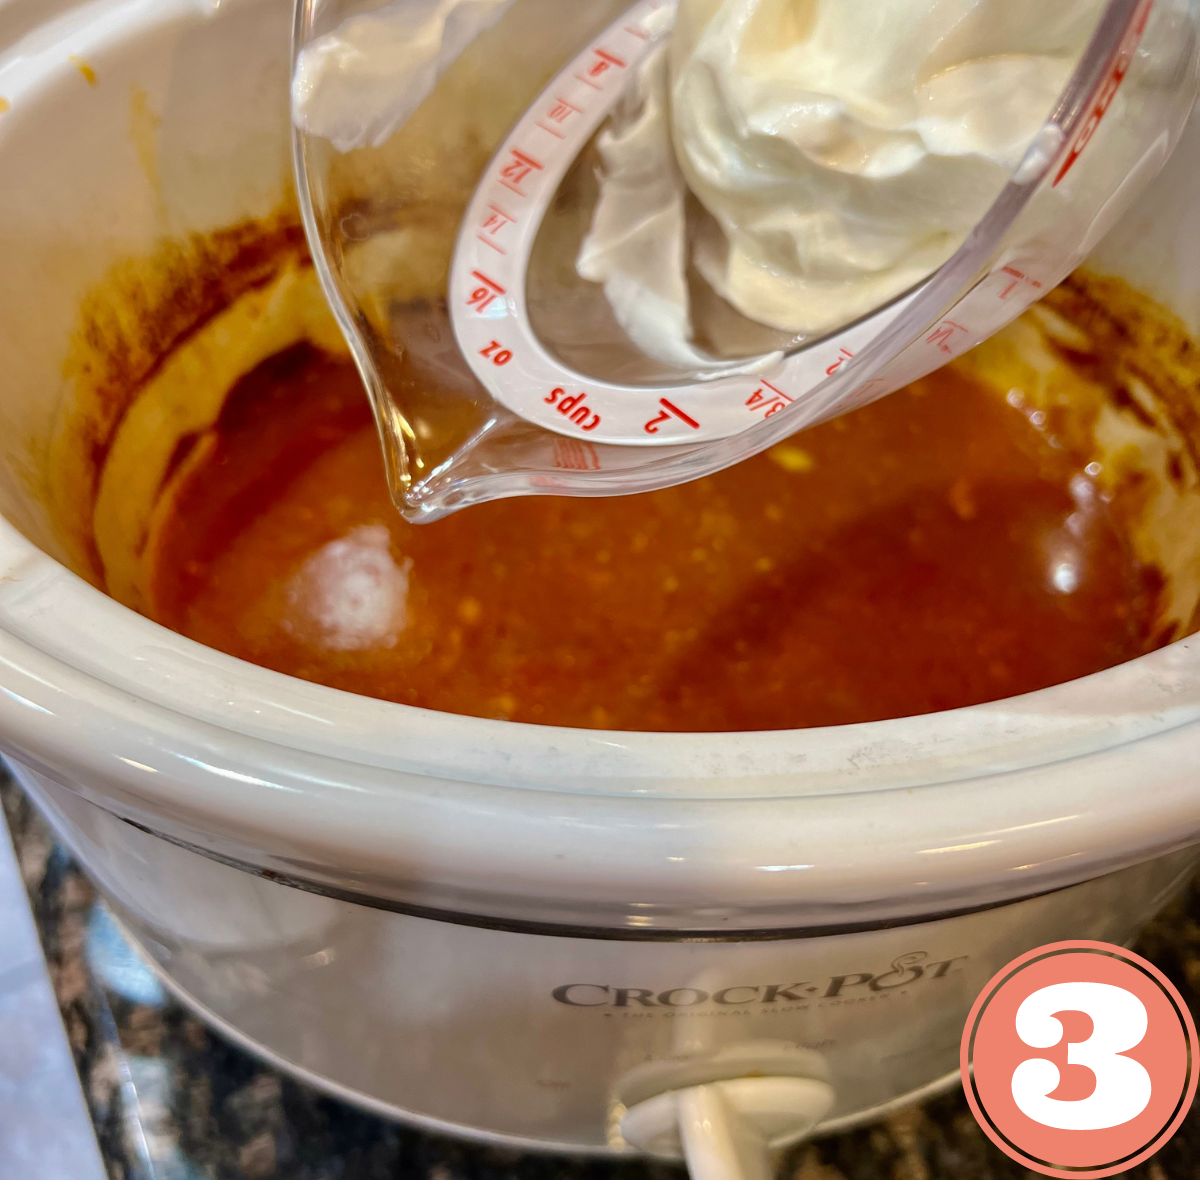 Greek yogurt in a measuring cup being added to a crockpot filled with salsa